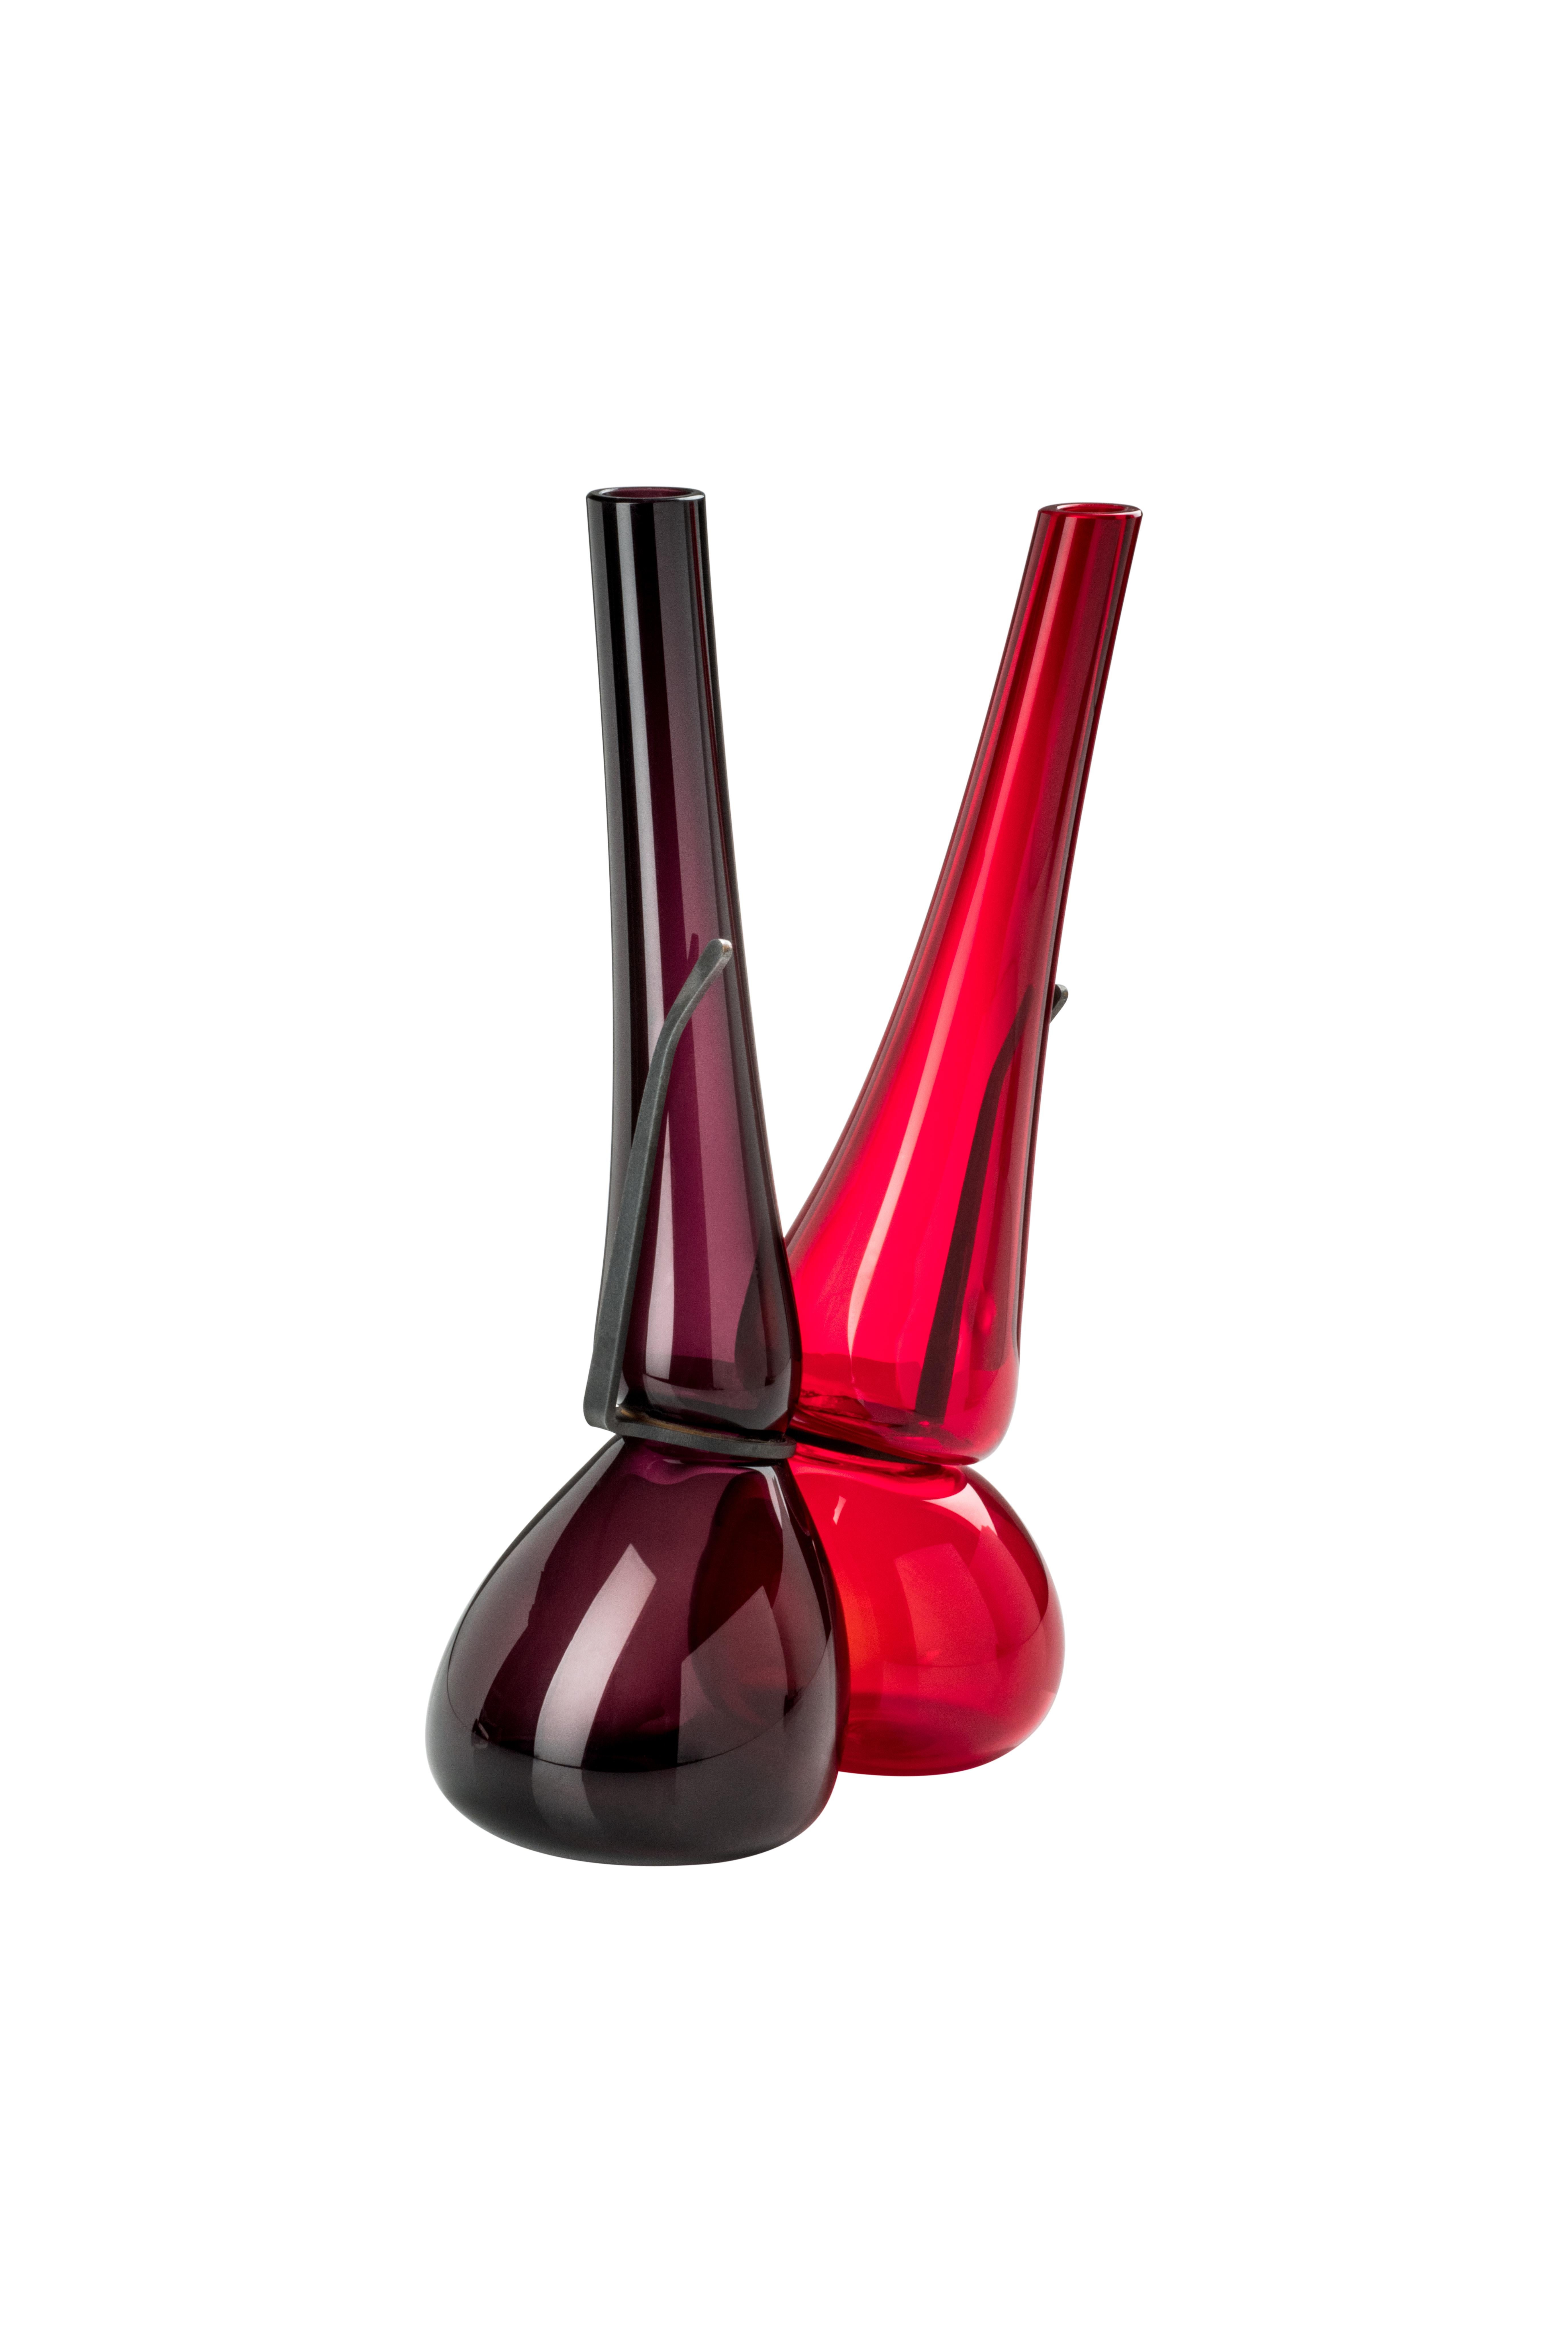 Venini double glass vase in red and violet designed by Ron Arad in 2018. Perfect for indoor home decor as container or statement piece for any room. Also available in other colors on 1stdibs.

Dimensions: 20 cm diameter x cm height.